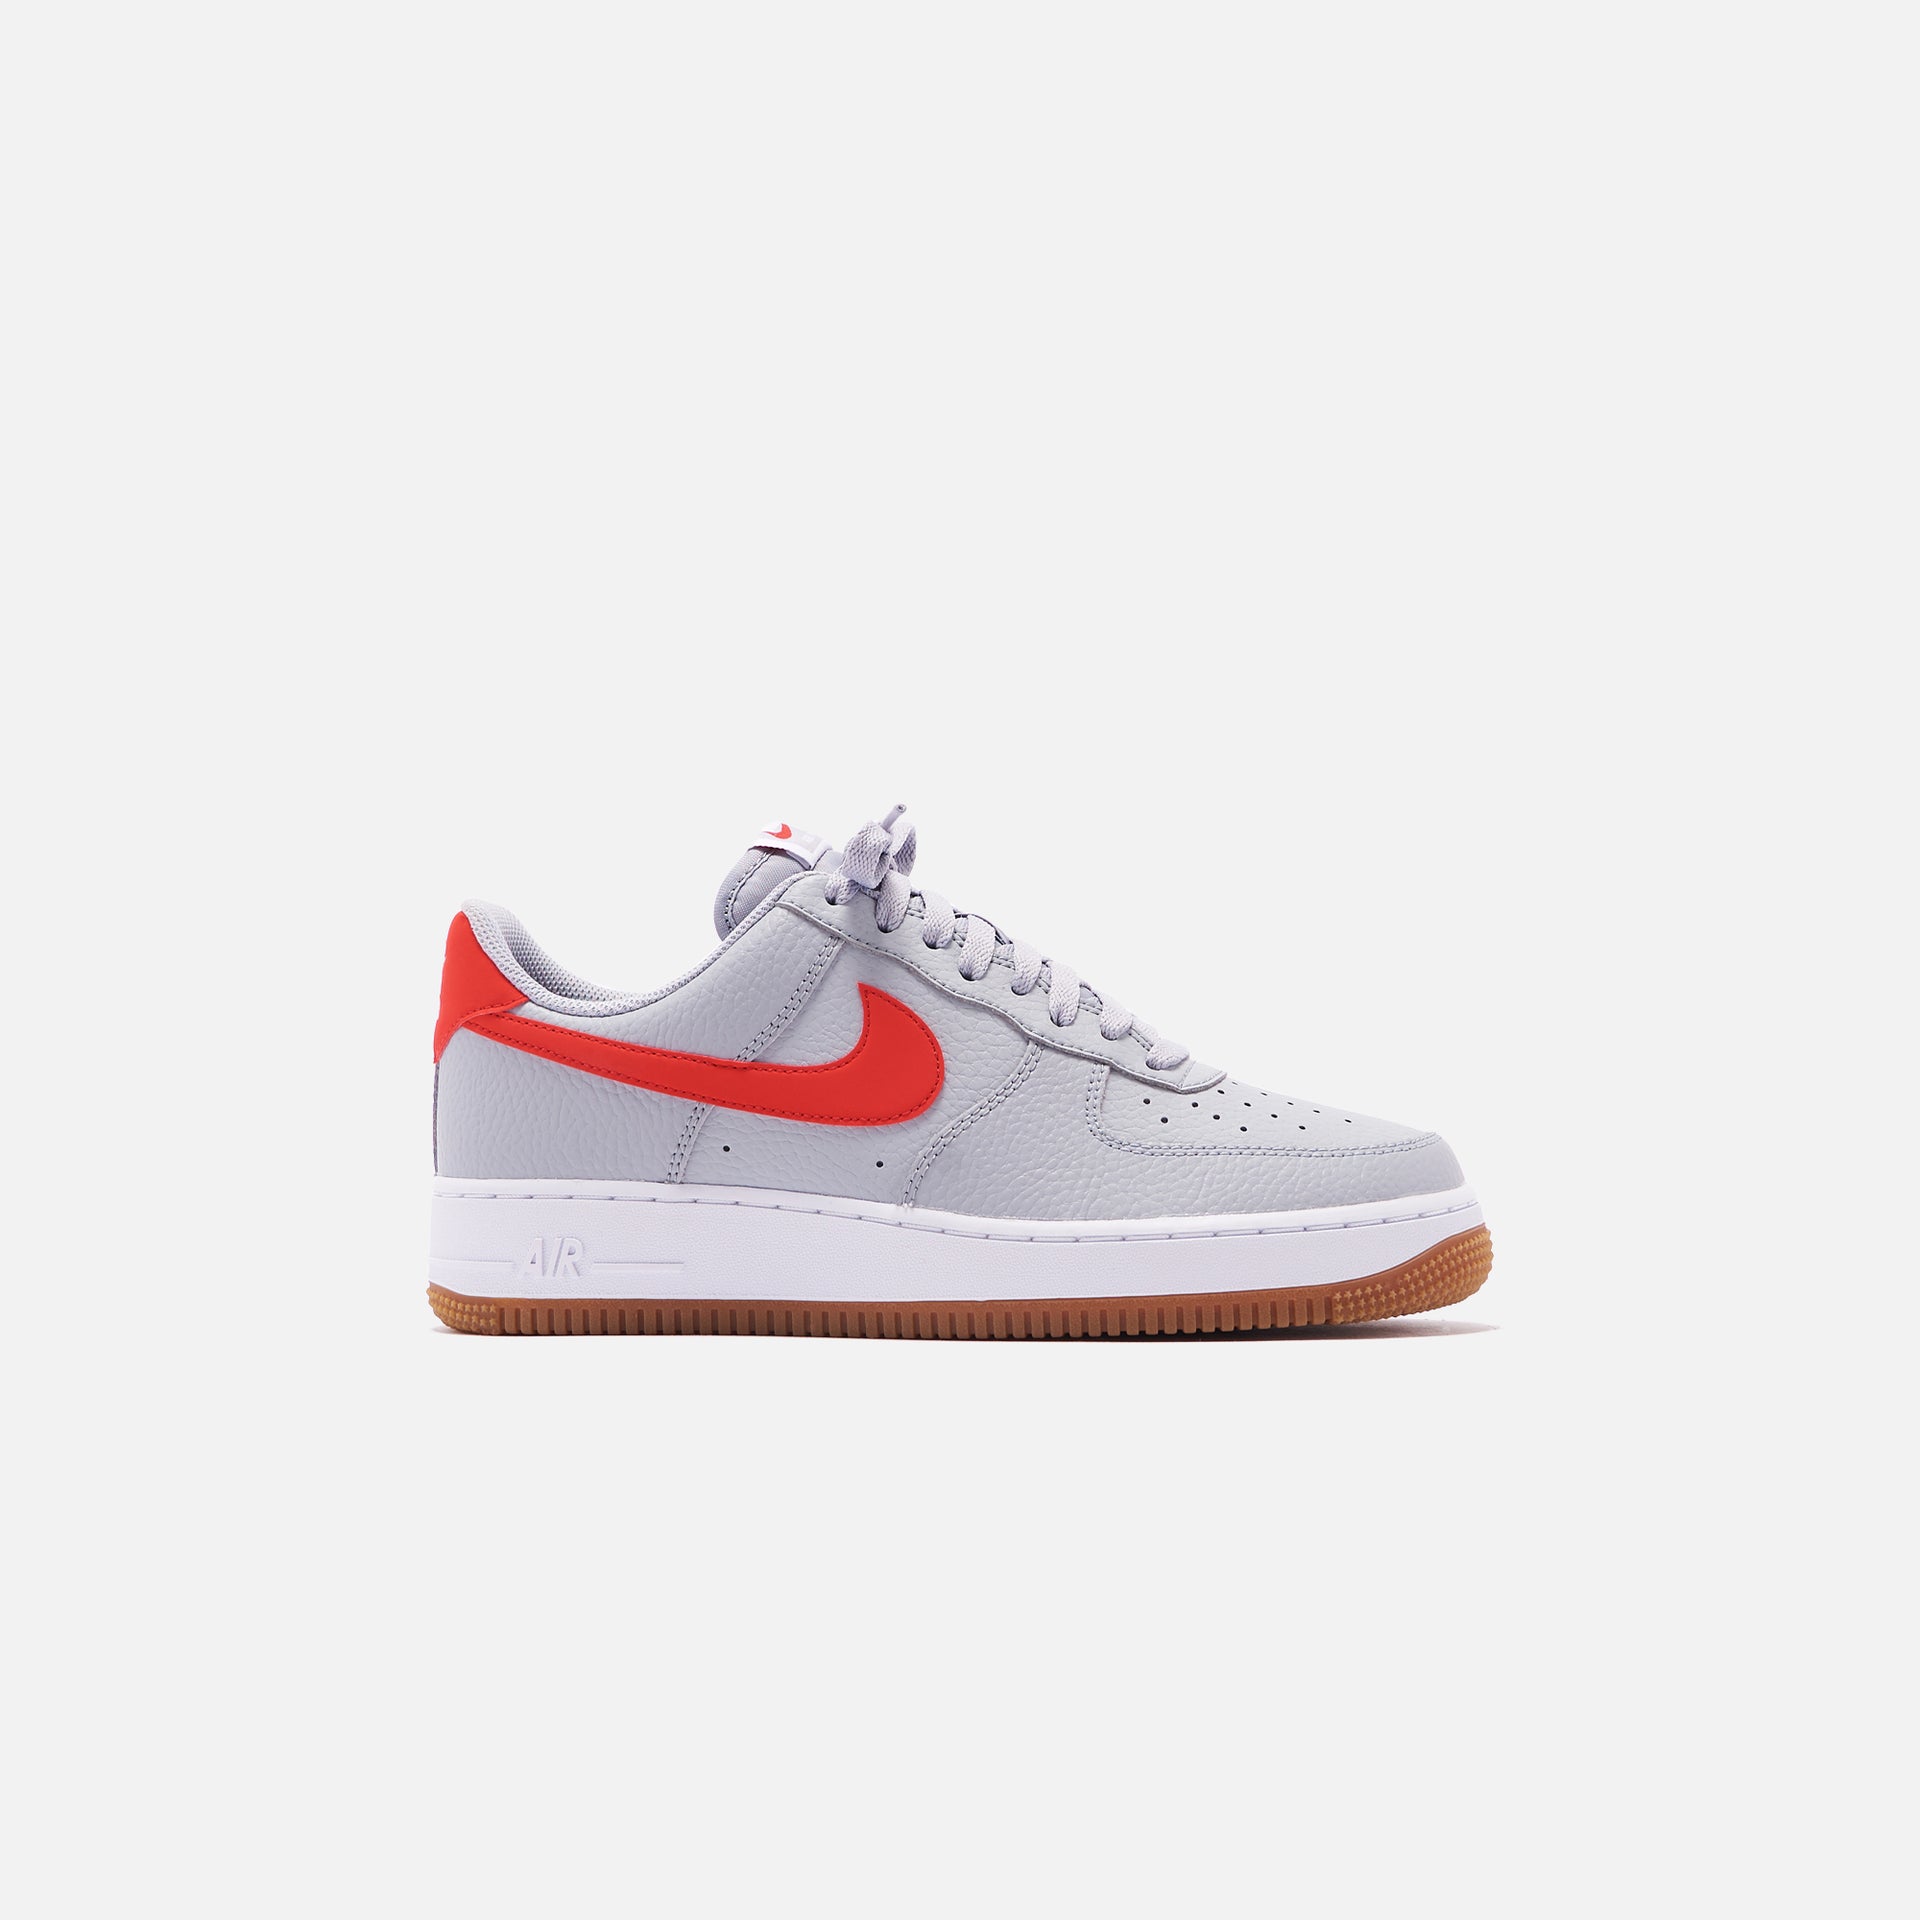 Nike Air Force 1 '07 LV8 Low - Wolf Grey / University Red / White Gum